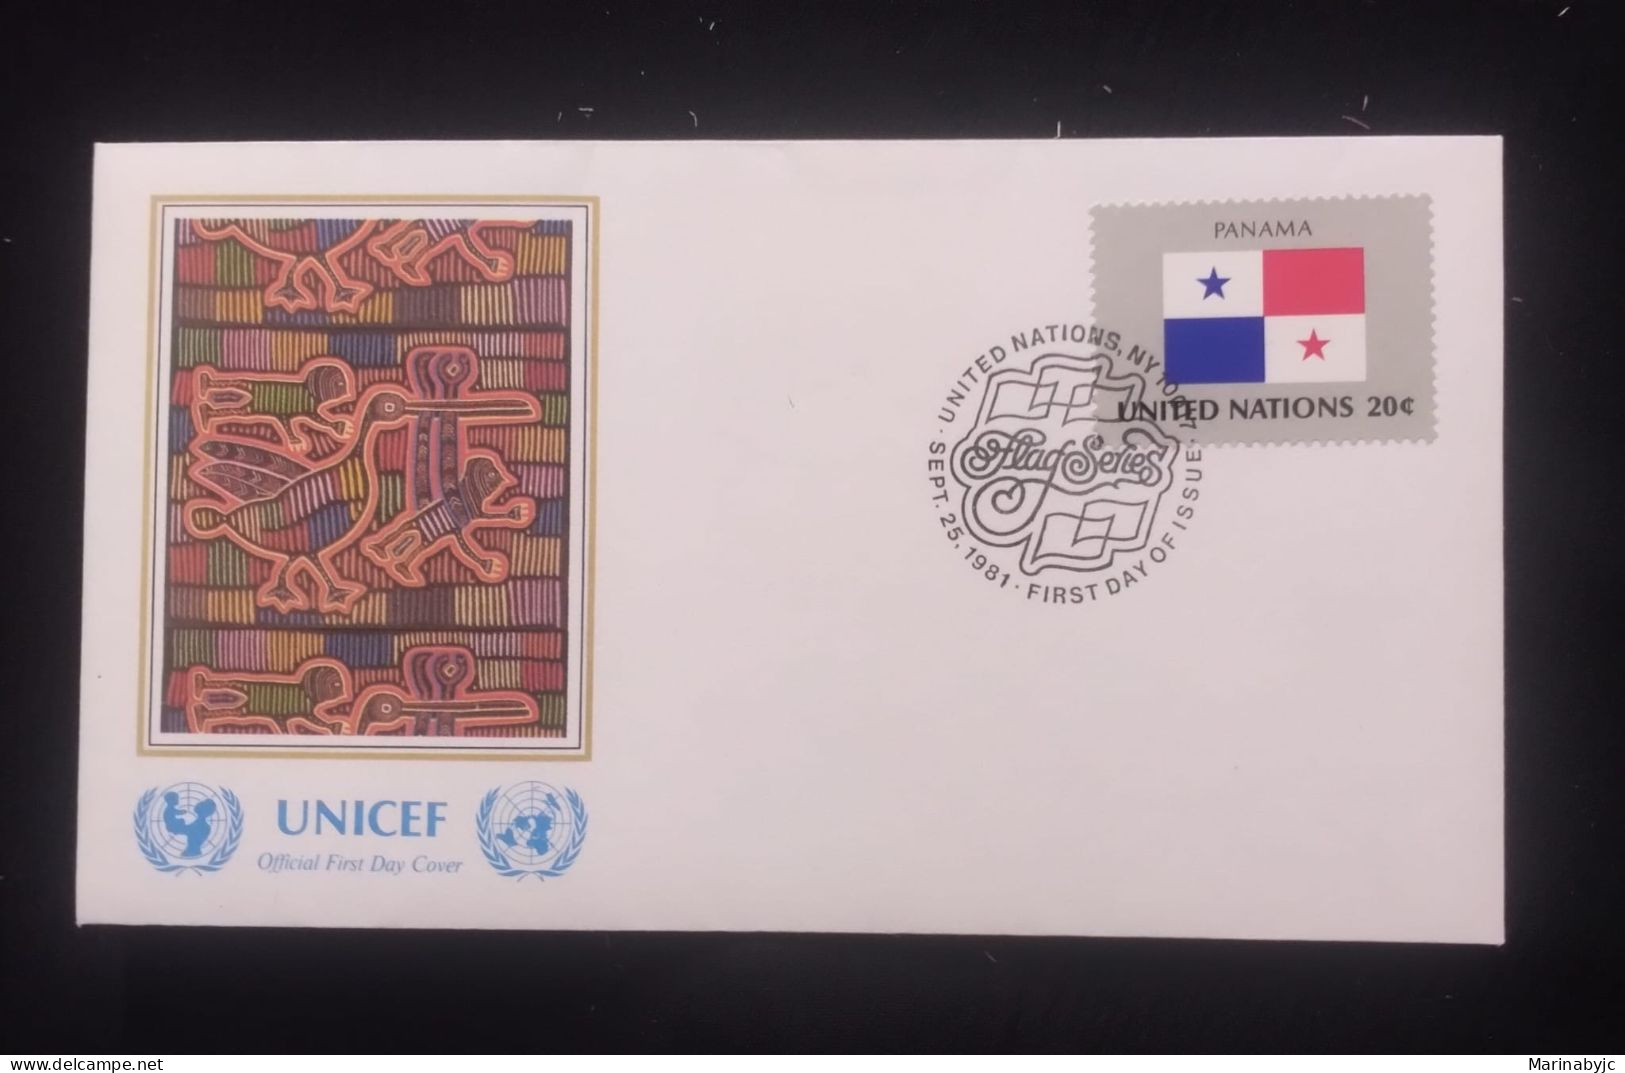 EL)1980 UNITED NATIONS, NATIONAL FLAG OF THE MEMBER COUNTRIES, PANAMA, ART - PAINTING, UNICEF, FDC - Nuovi